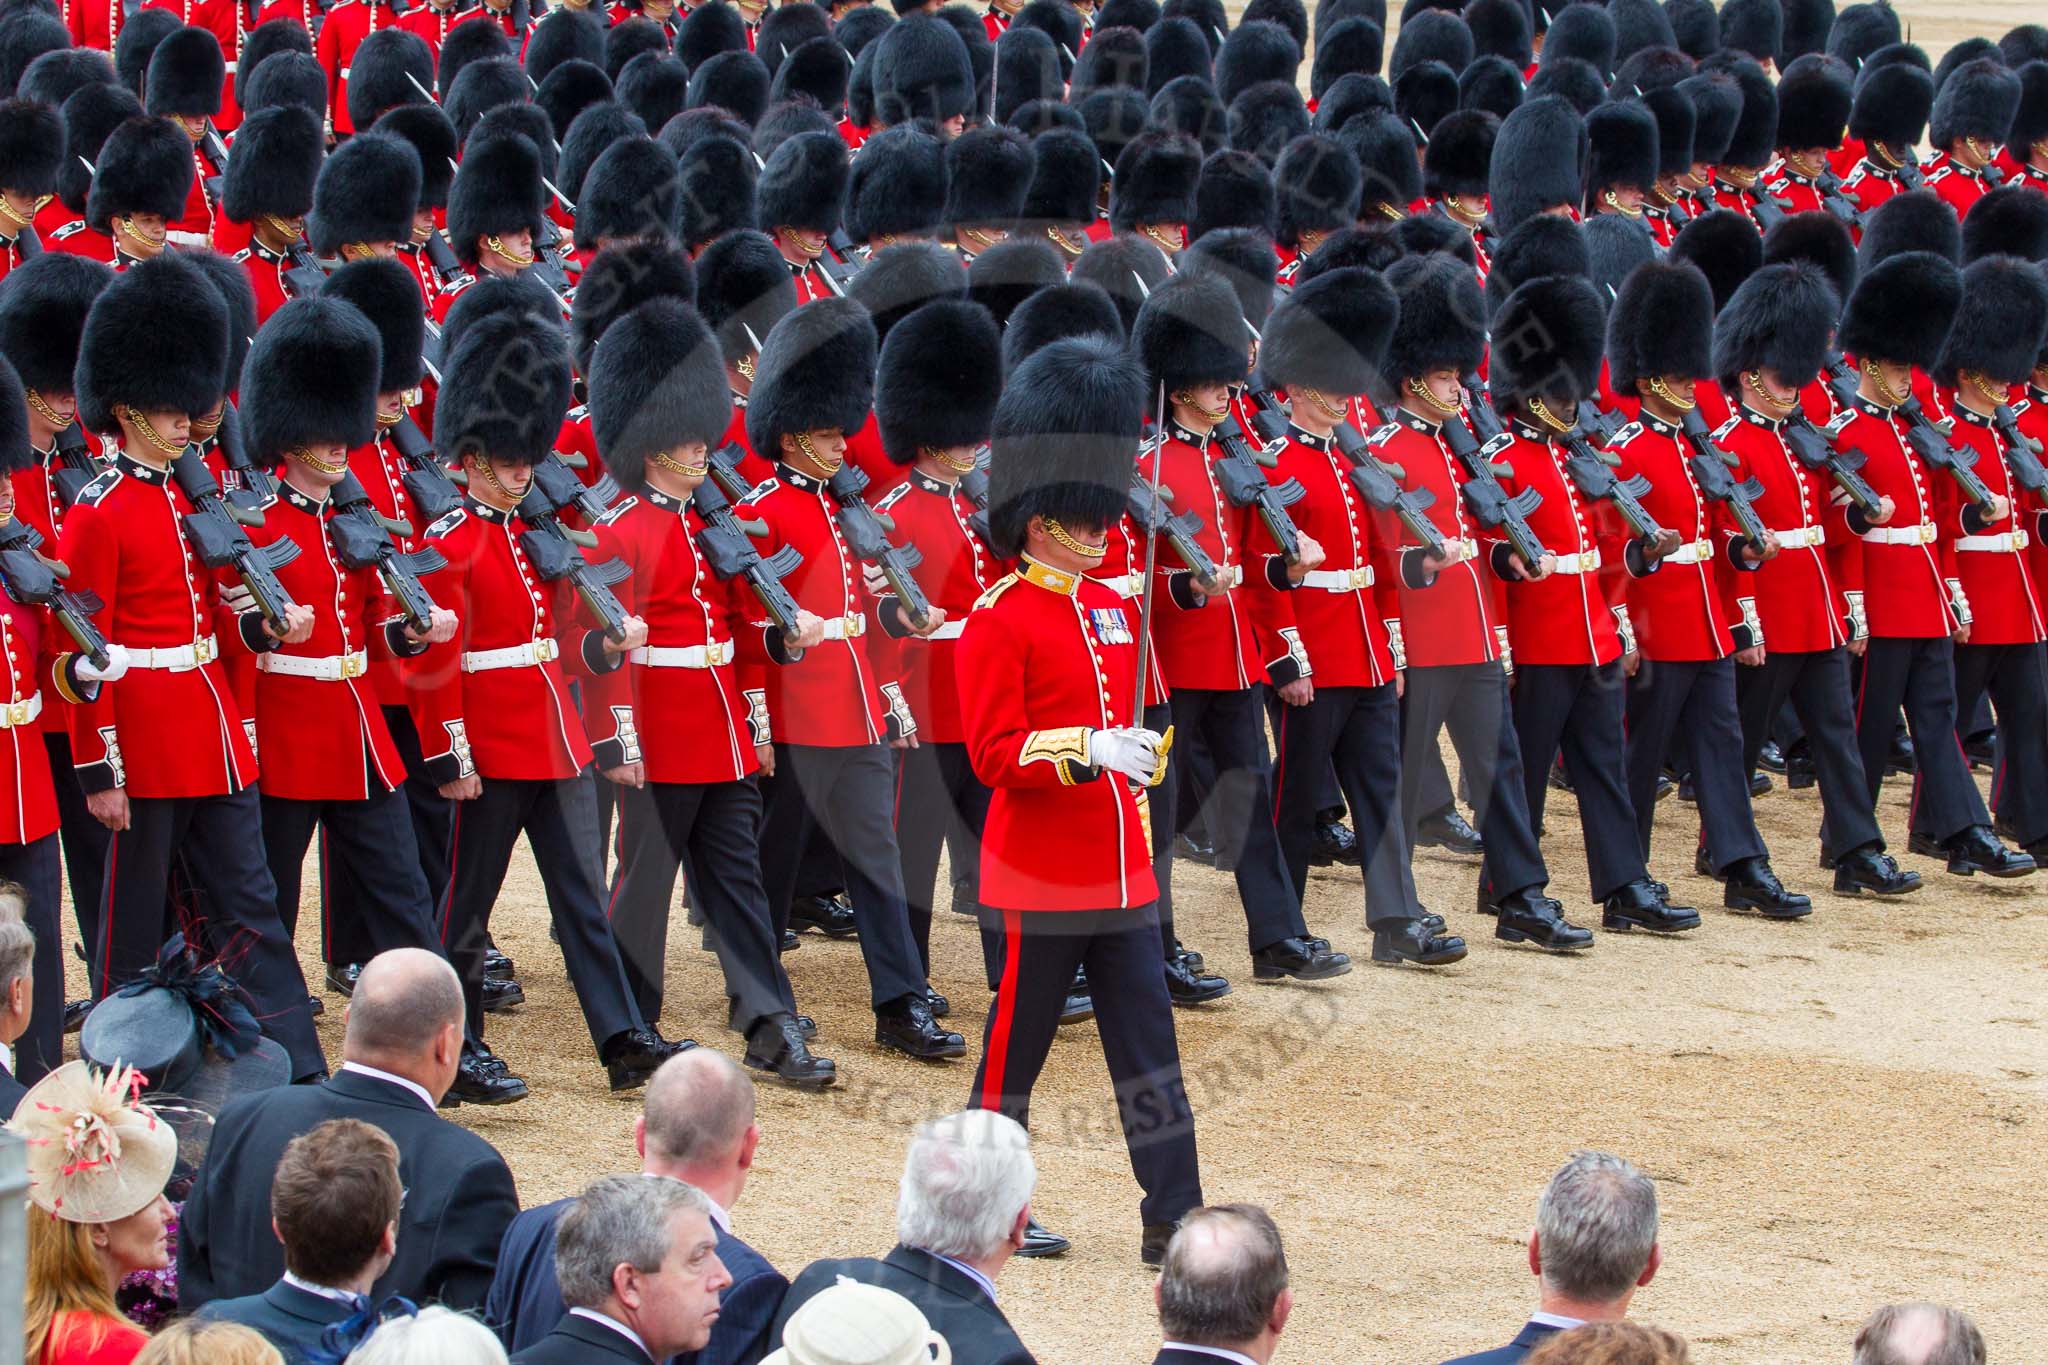 Trooping the Colour 2014.
Horse Guards Parade, Westminster,
London SW1A,

United Kingdom,
on 14 June 2014 at 11:38, image #636